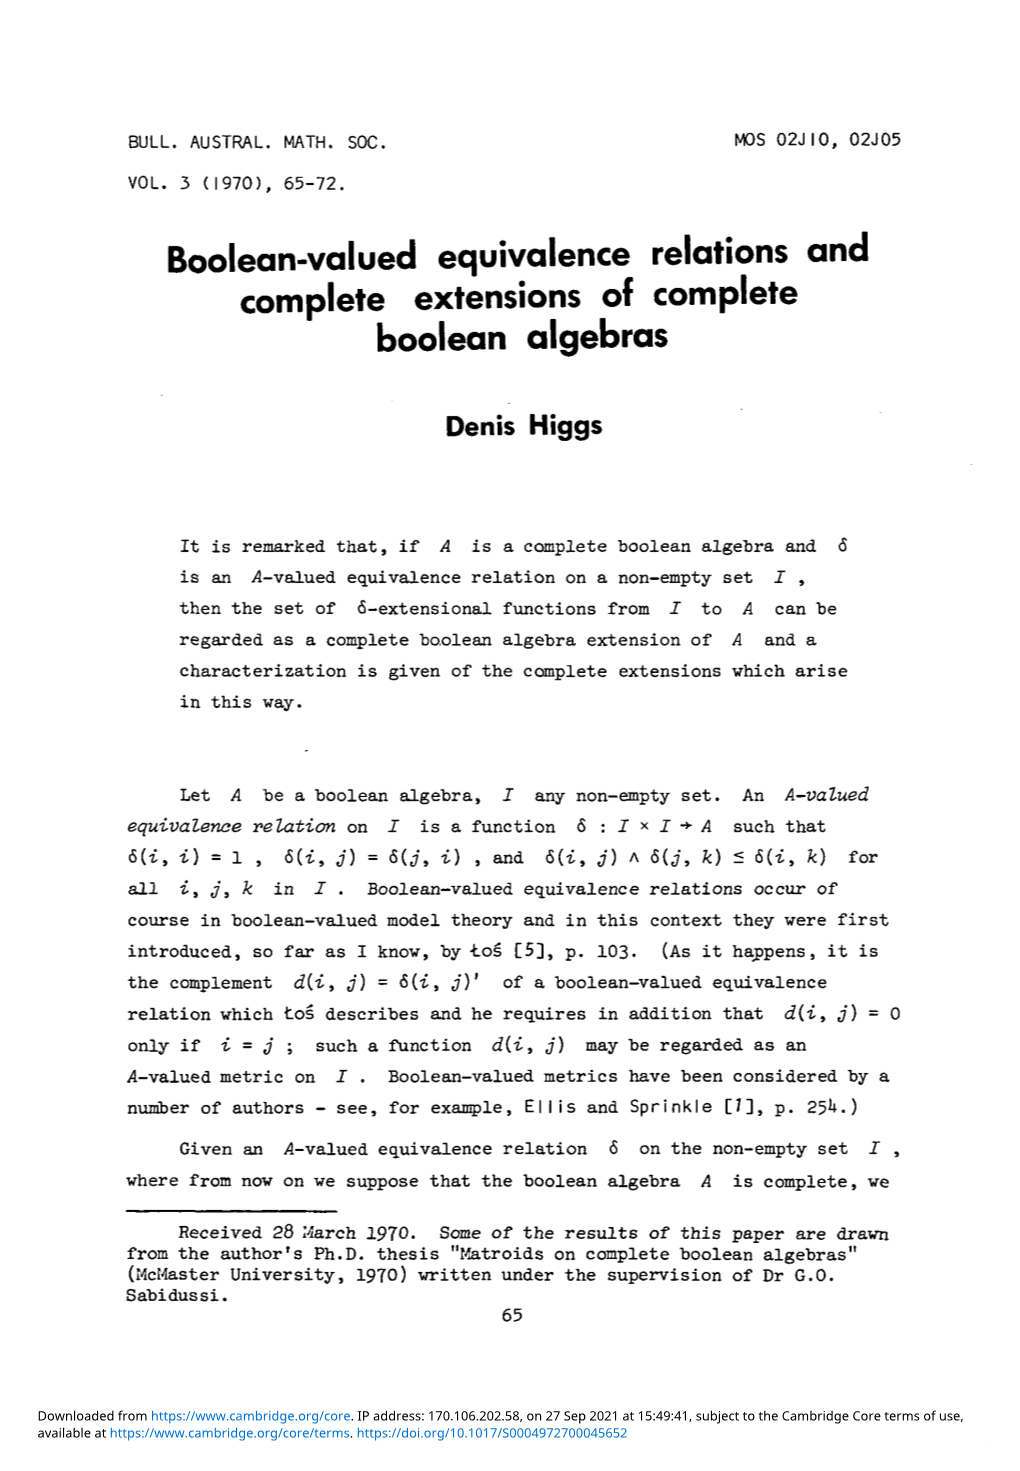 Boolean-Valued Equivalence Relations and Complete Extensions of Complete Boolean Algebras